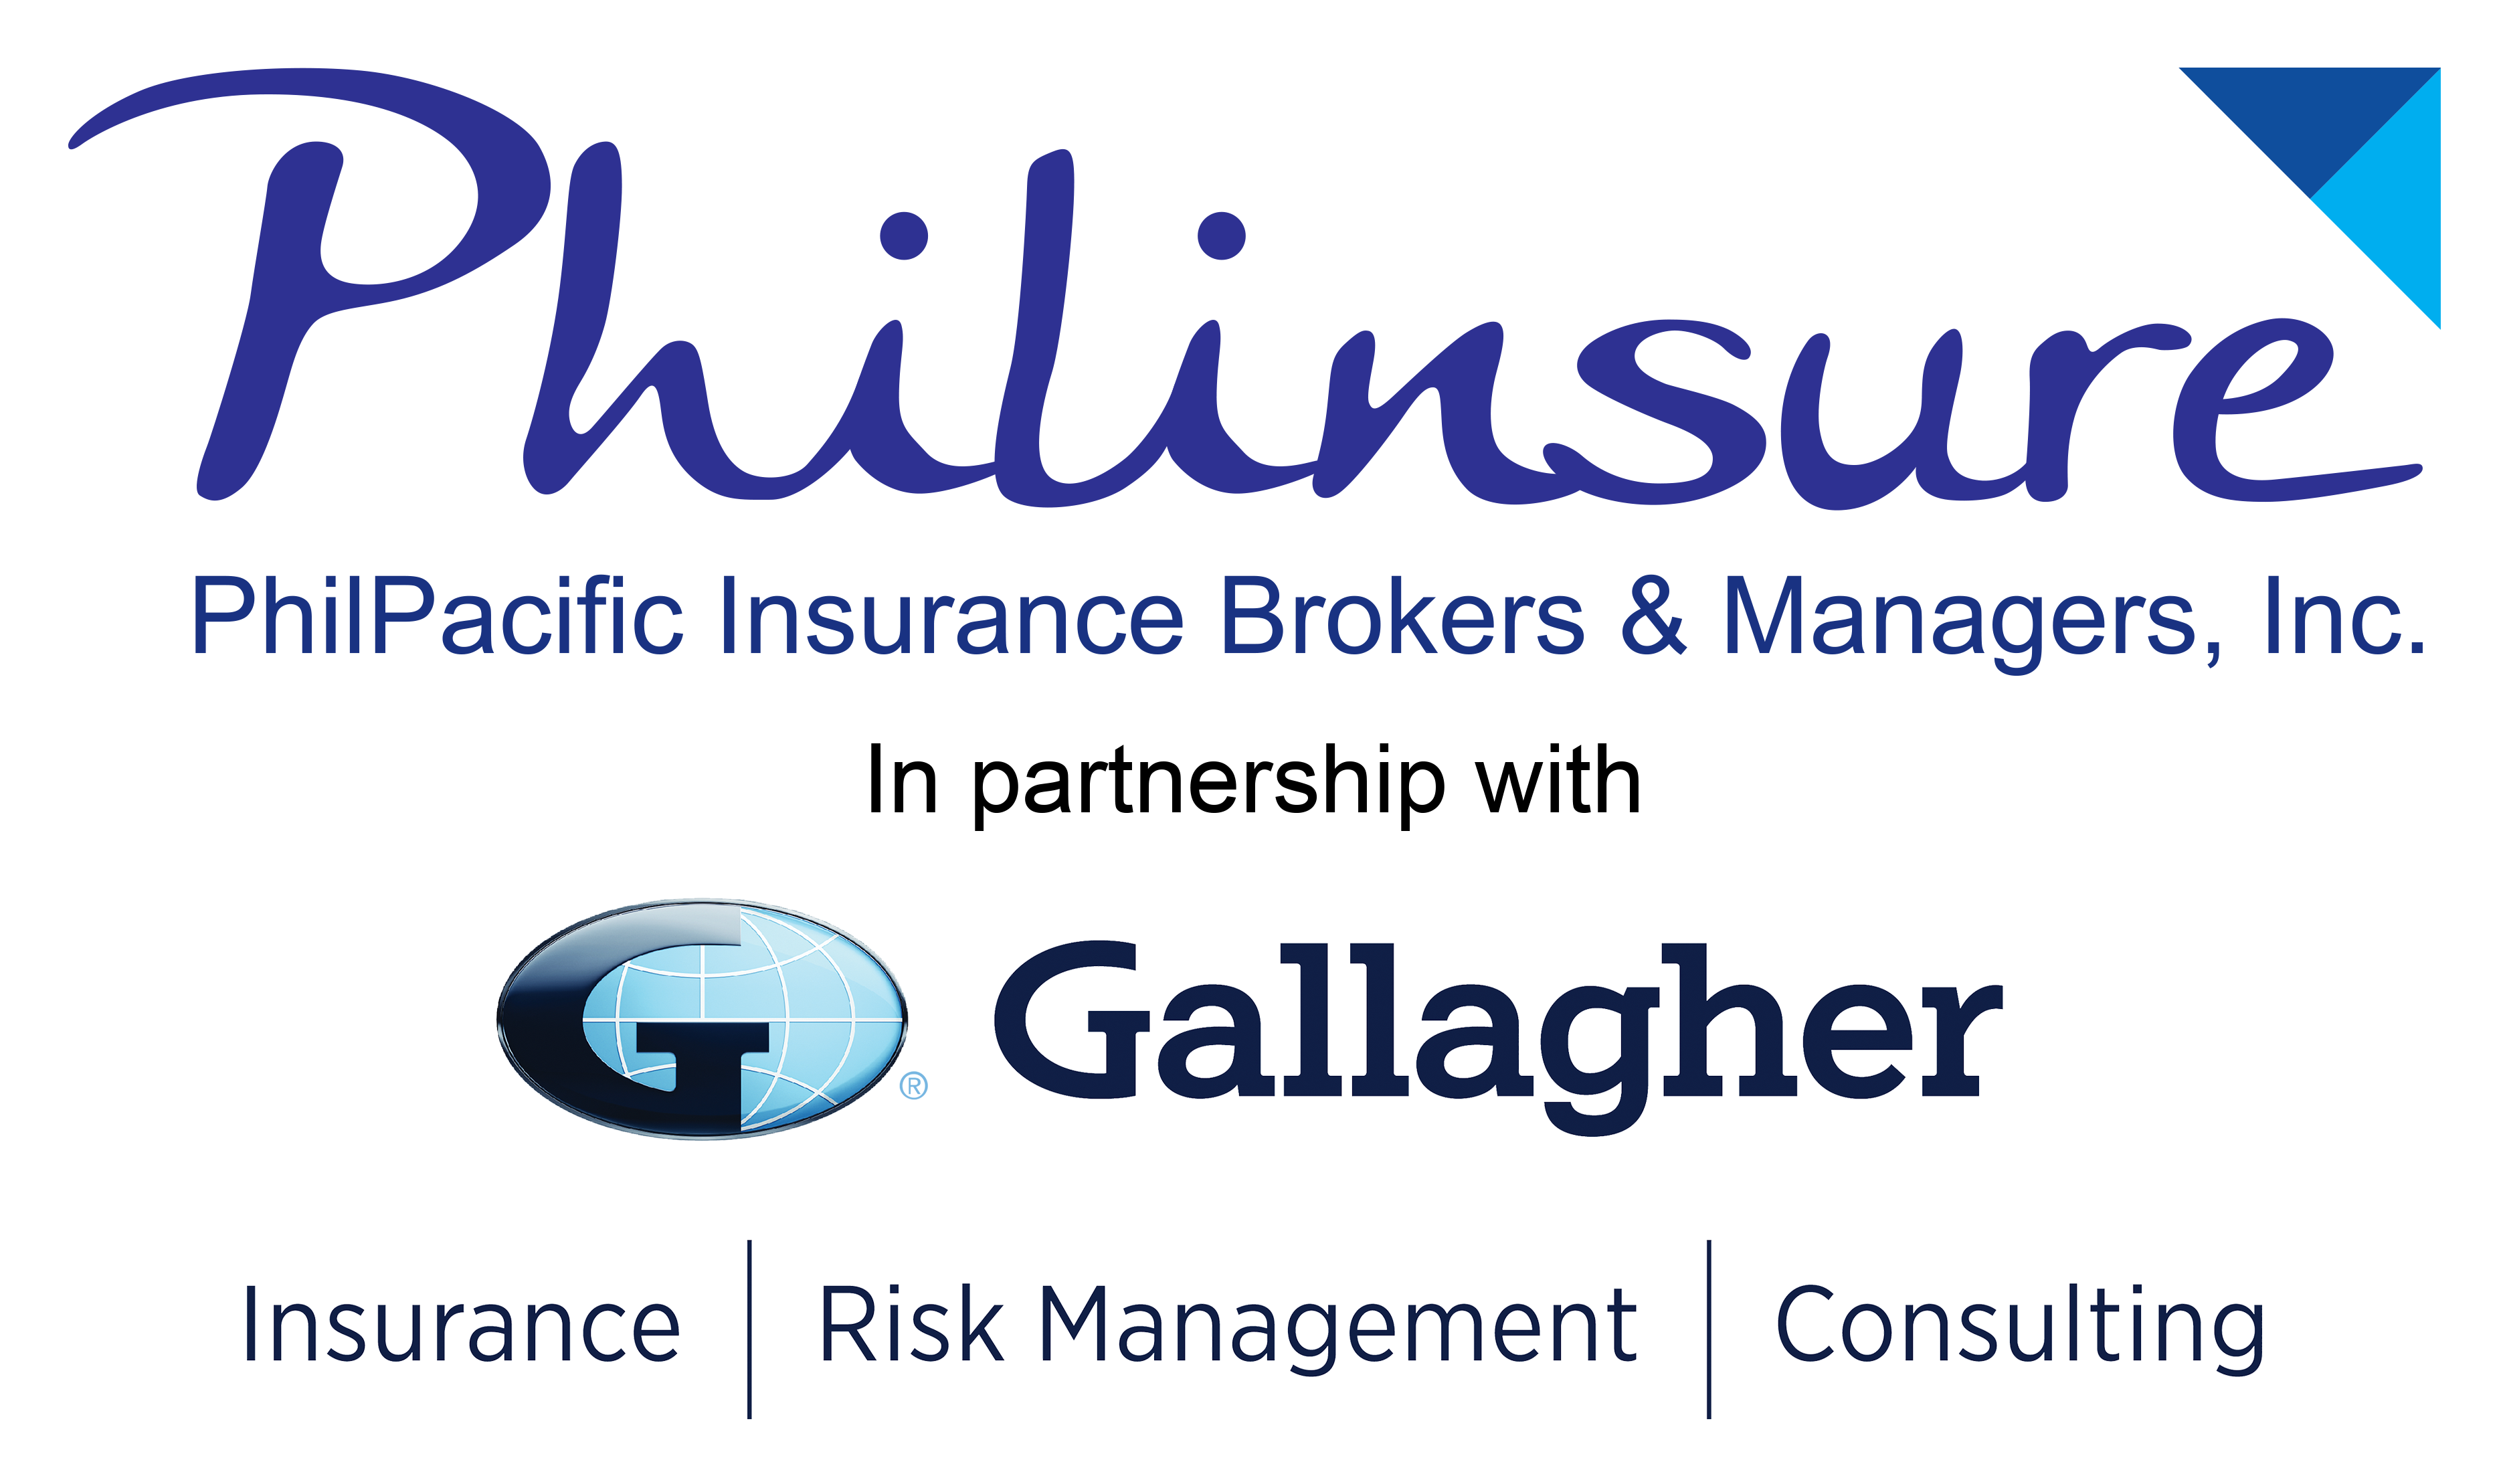 Philpacific Insurance Brokers & Managers, Inc. (Philinsure)